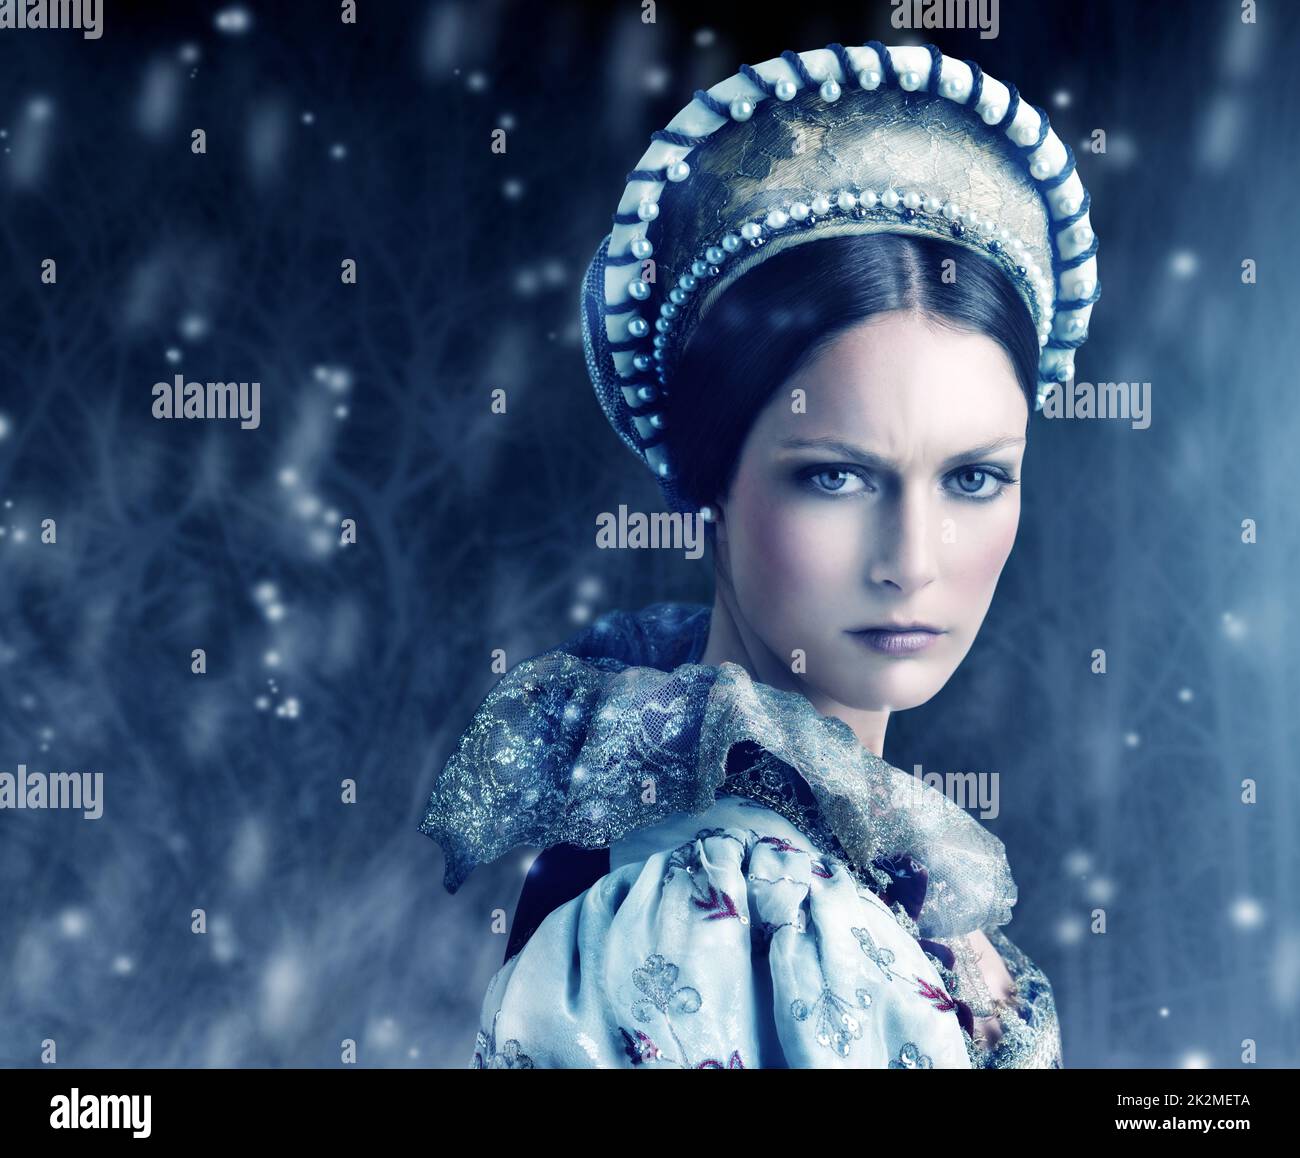 Dont let her gaze fall upon you. Portrait of a evil-looking queen with snow falling around her. Stock Photo